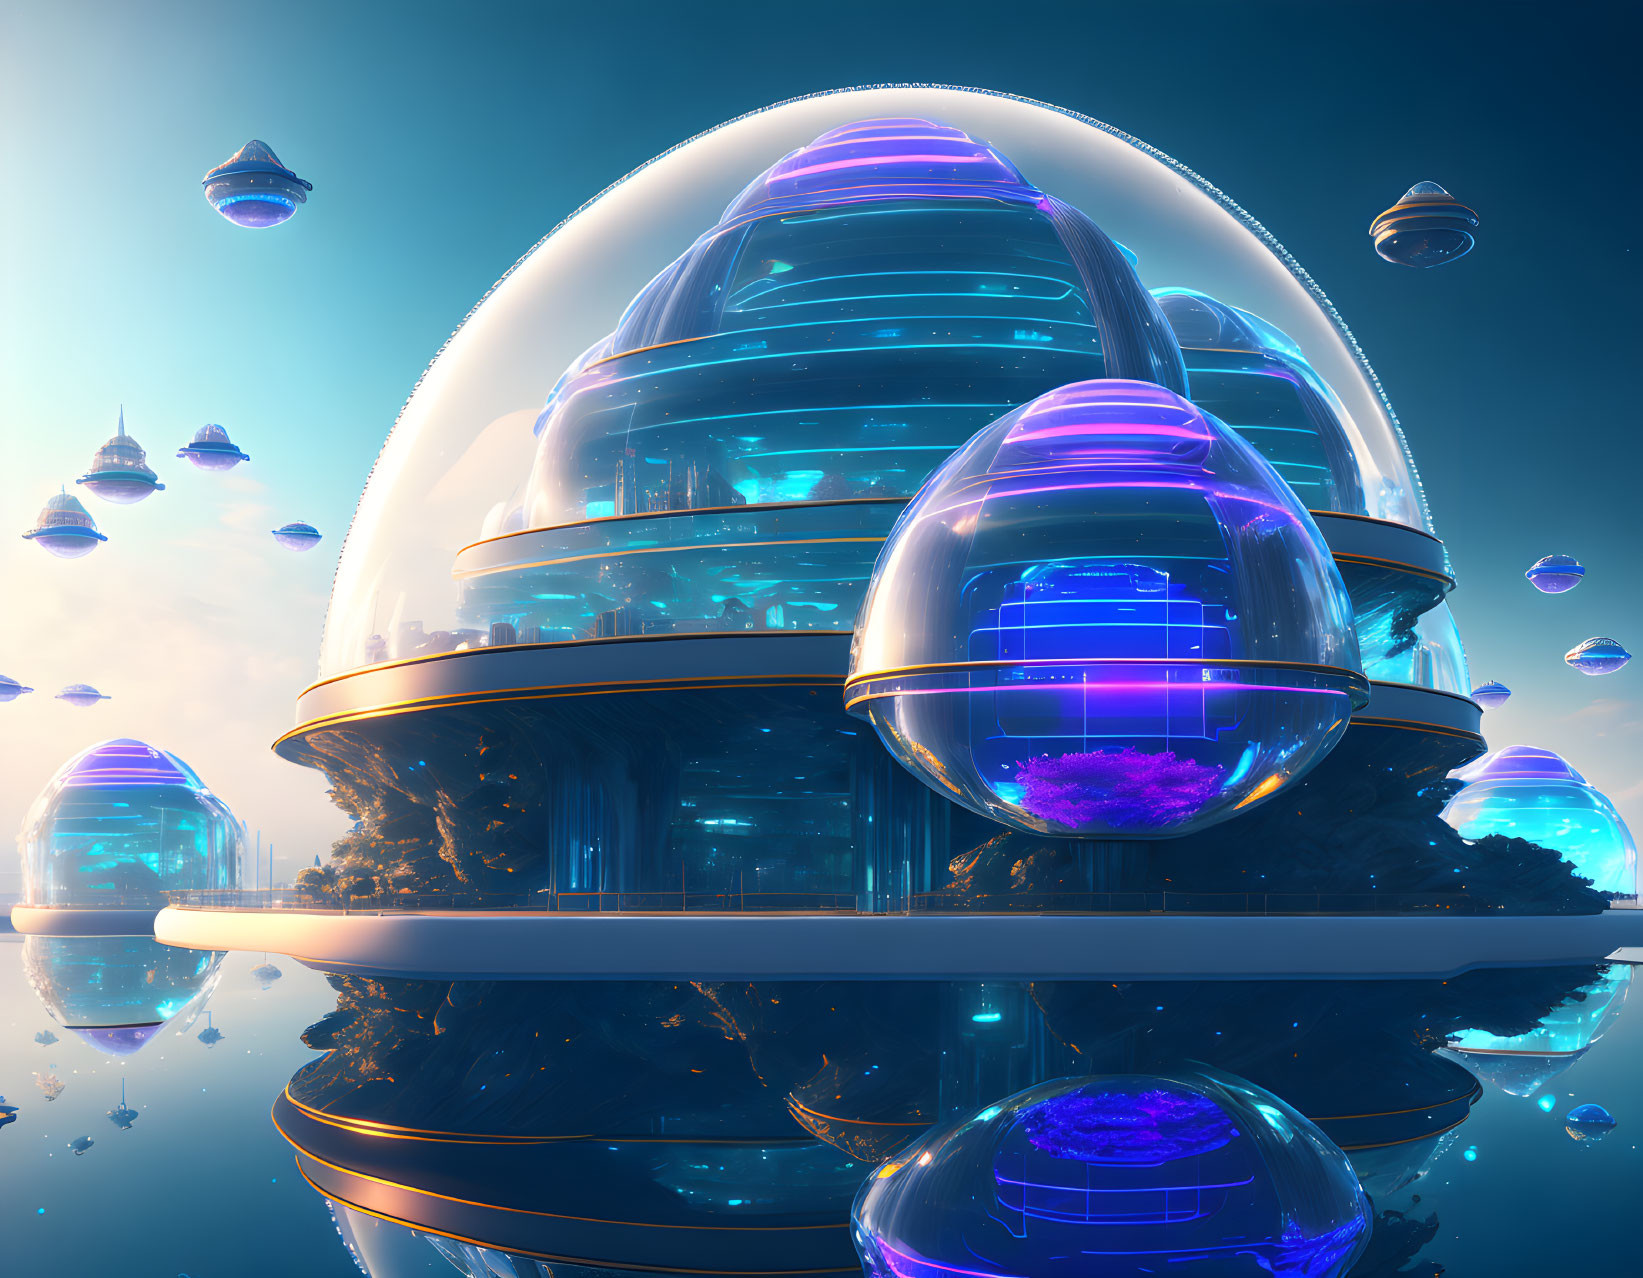 Glowing dome structures and levitating orbs in futuristic cityscape